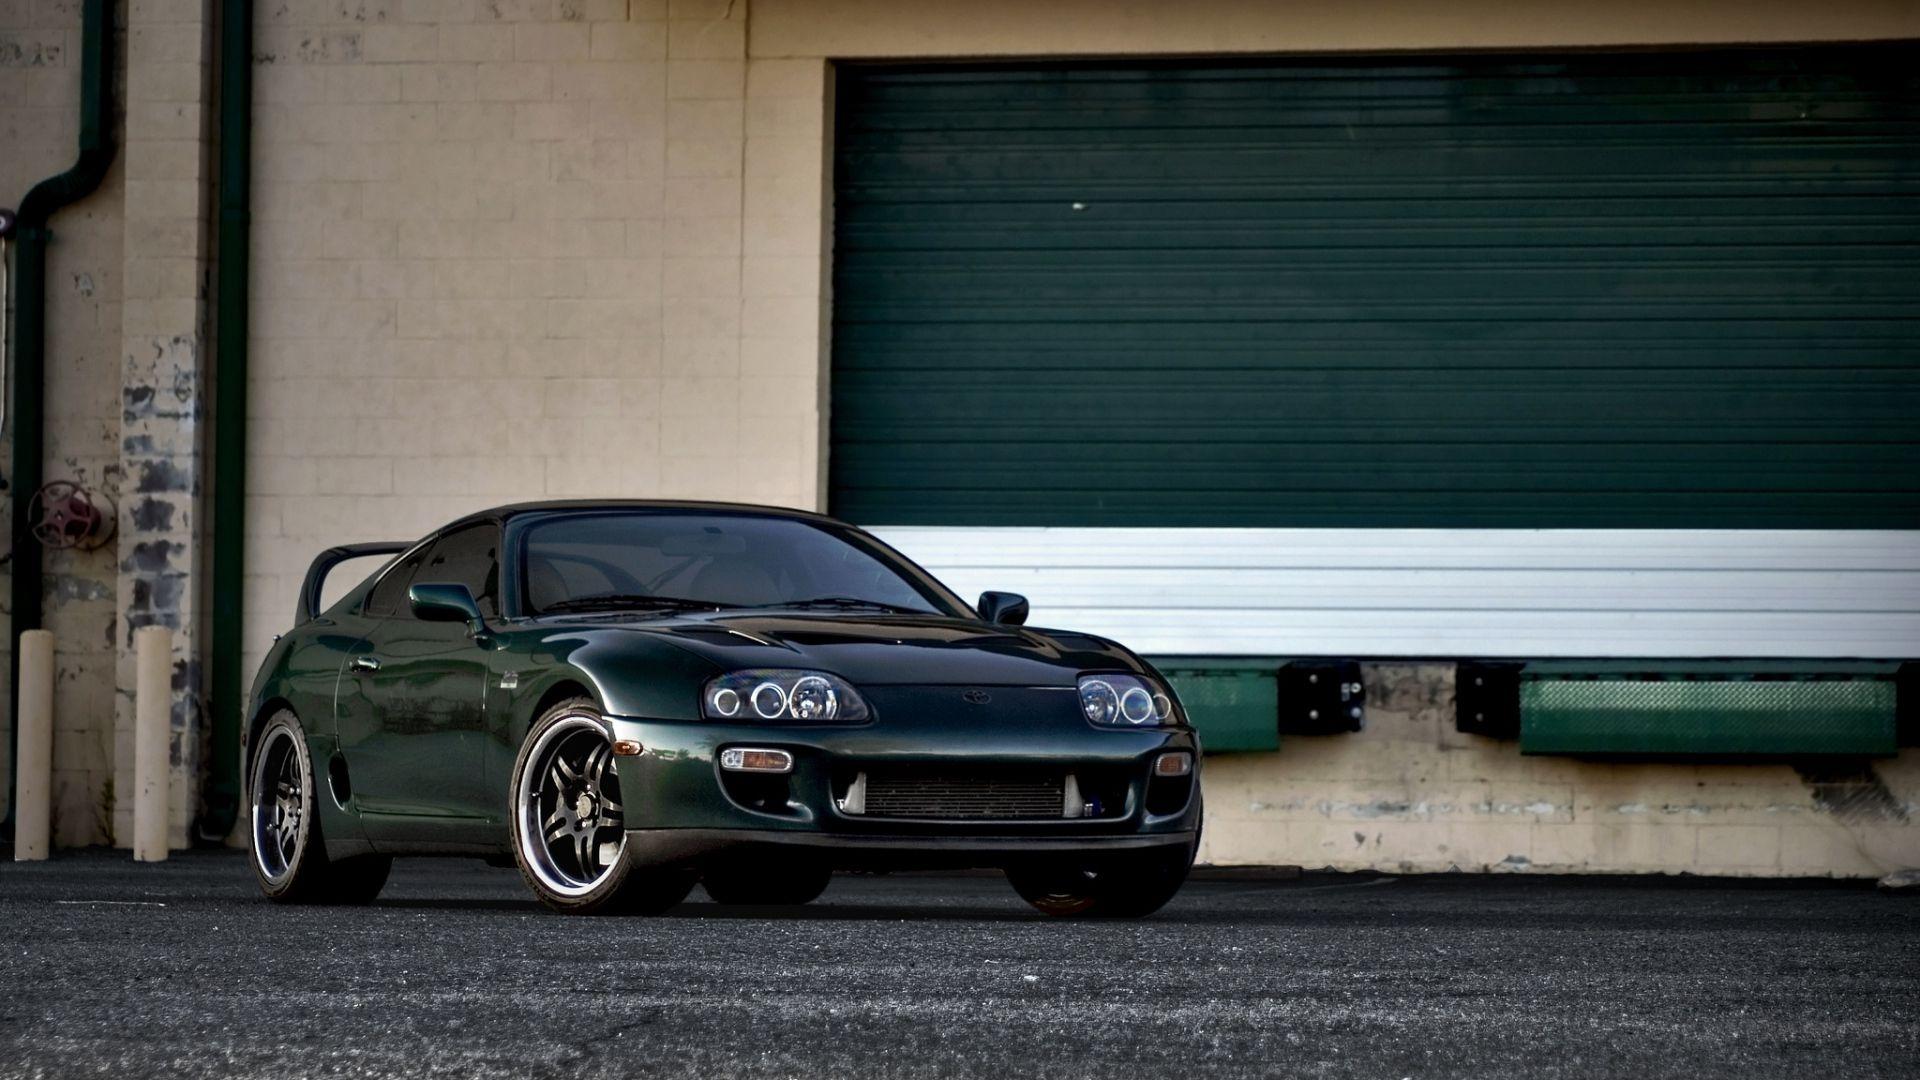 Full HD Wallpaper toyota supra sports car coupe metallic front view